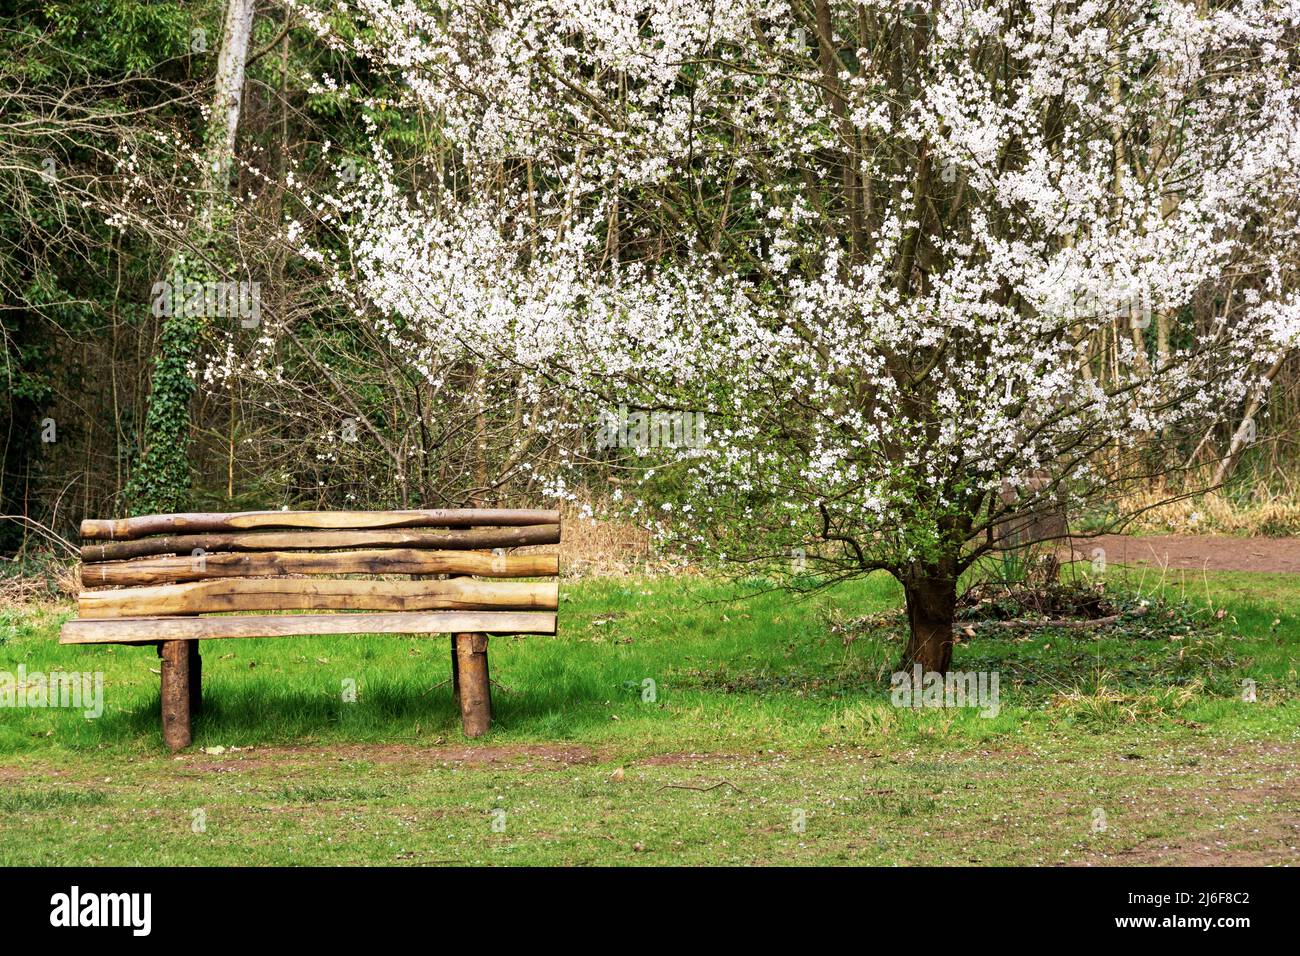 Prunus Sogdiana shrub in full flower in early spring, with a multitude of white blossom. A rustic bench is also featured. Stock Photo